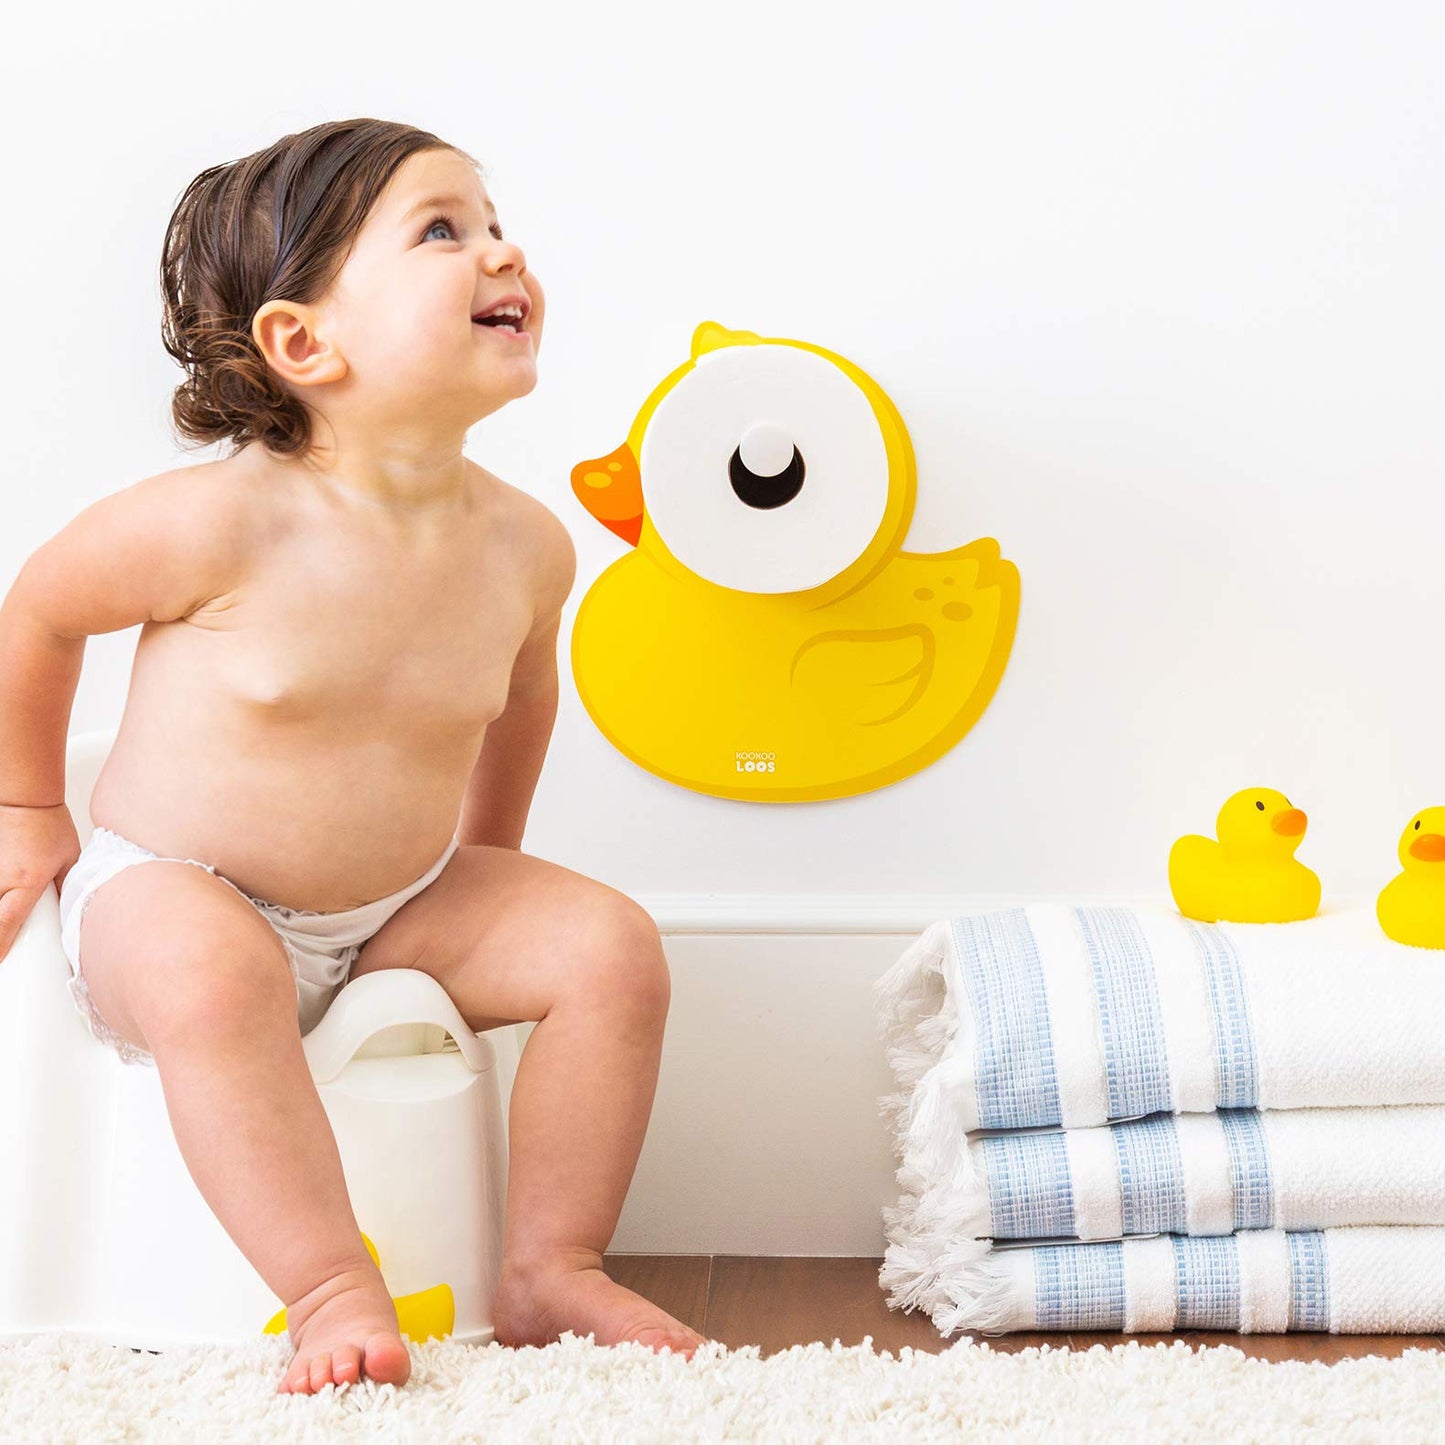 KooKooDucky Potty Training Accessory Toilet Paper Holder and Bathroom Decoration Ducky